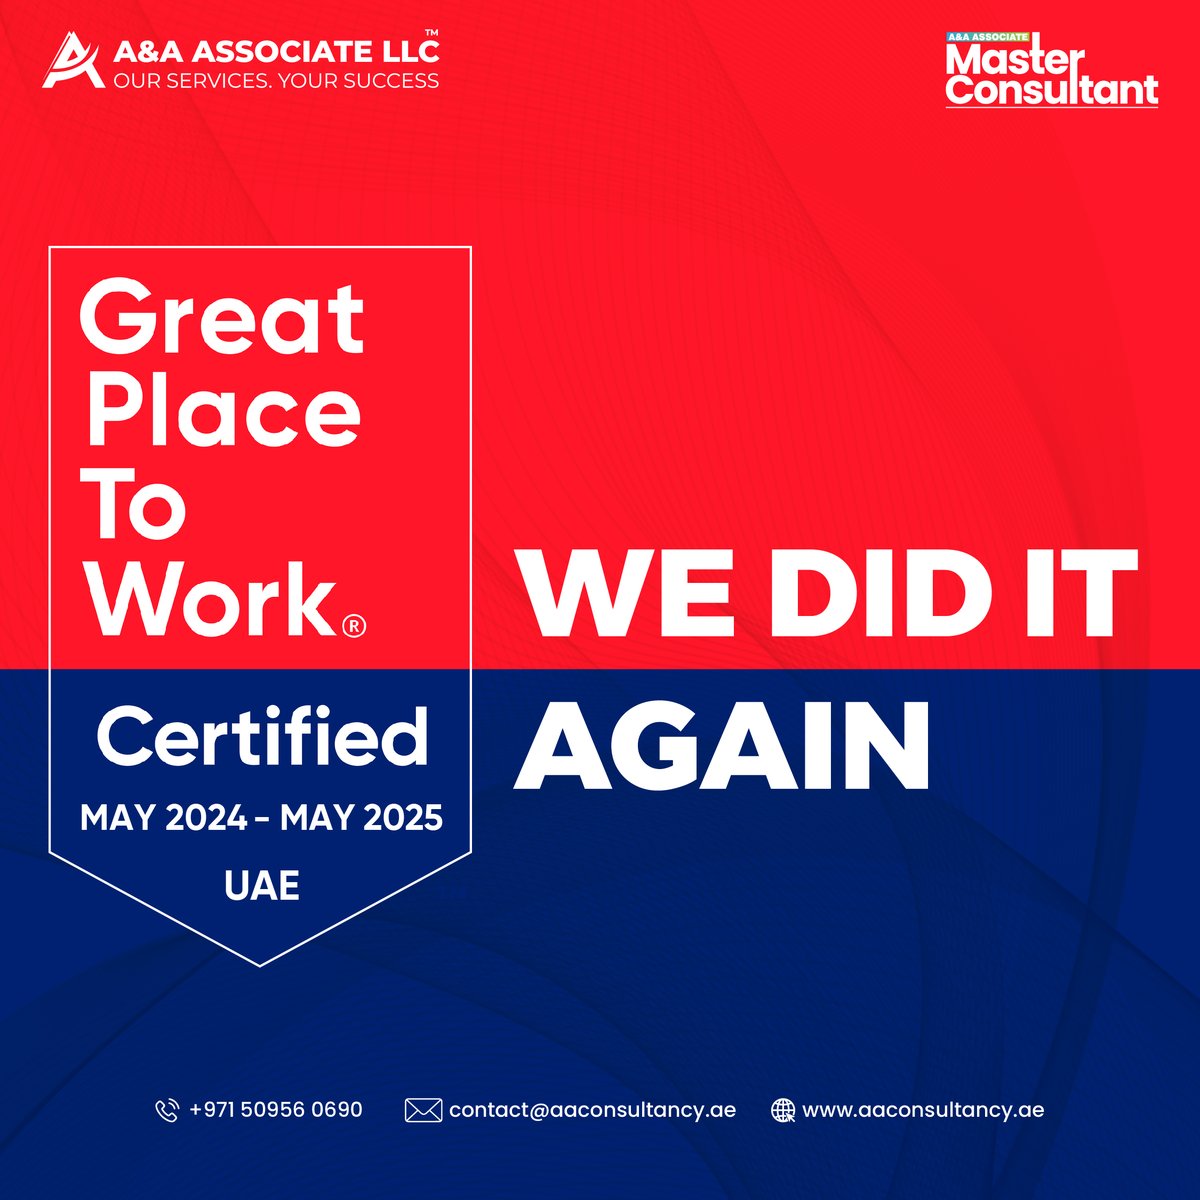 We did it again! 🌟 Proud to be certified as a ‘Great Place to Work’ in 2024, two years running! 

This award is a testament to our culture and every team member who makes it possible.

#bestworkplaces #dreamteam #proud #greatplacetowork #gptwcertified #teamwork #uae #success